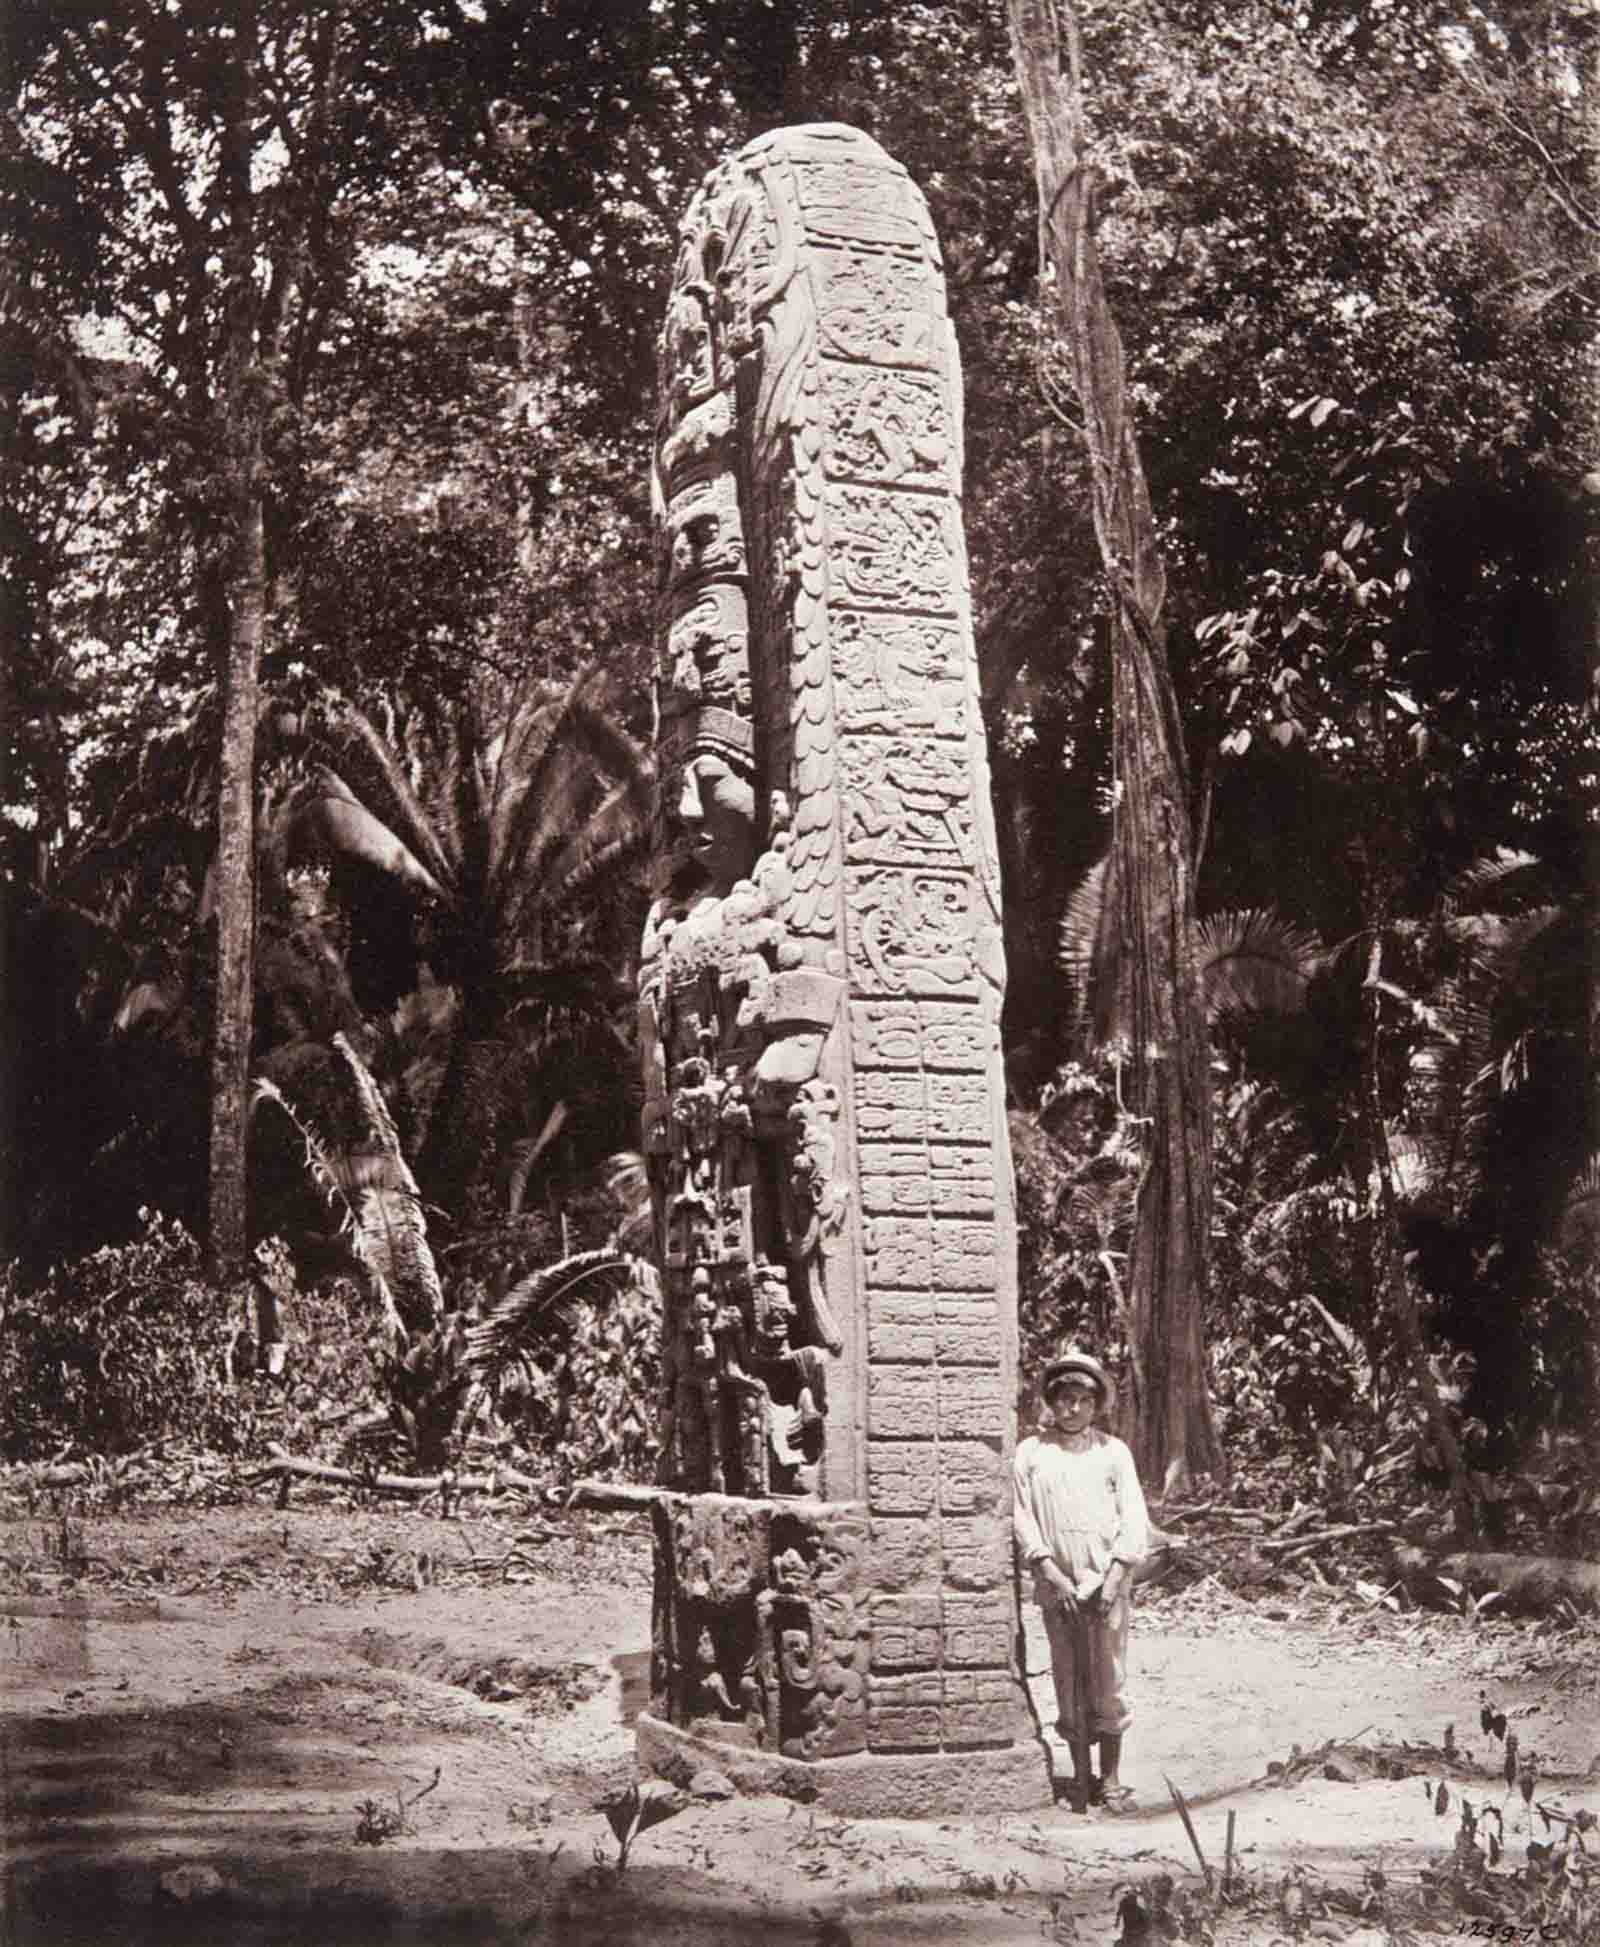 Stela D. Maudslay has included in the photograph one of his local assistants, or mozos, to show the huge size of the monolith, nearly six meters in height.